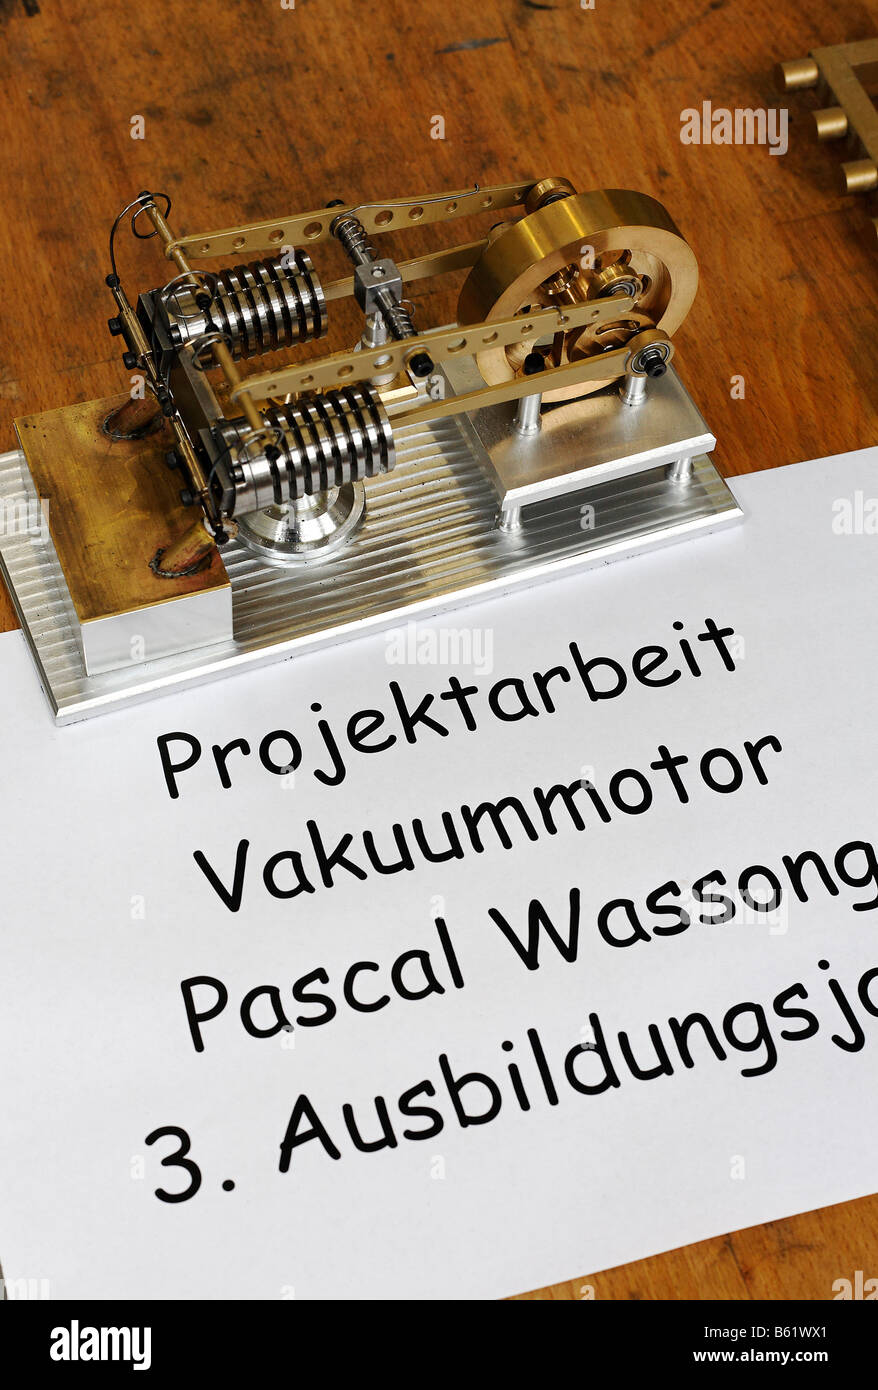 Small vacuum motor, apprentice project work exhibition, work-shop in the Max-Planck-Institute for radio astronomy, Bad Muenster Stock Photo